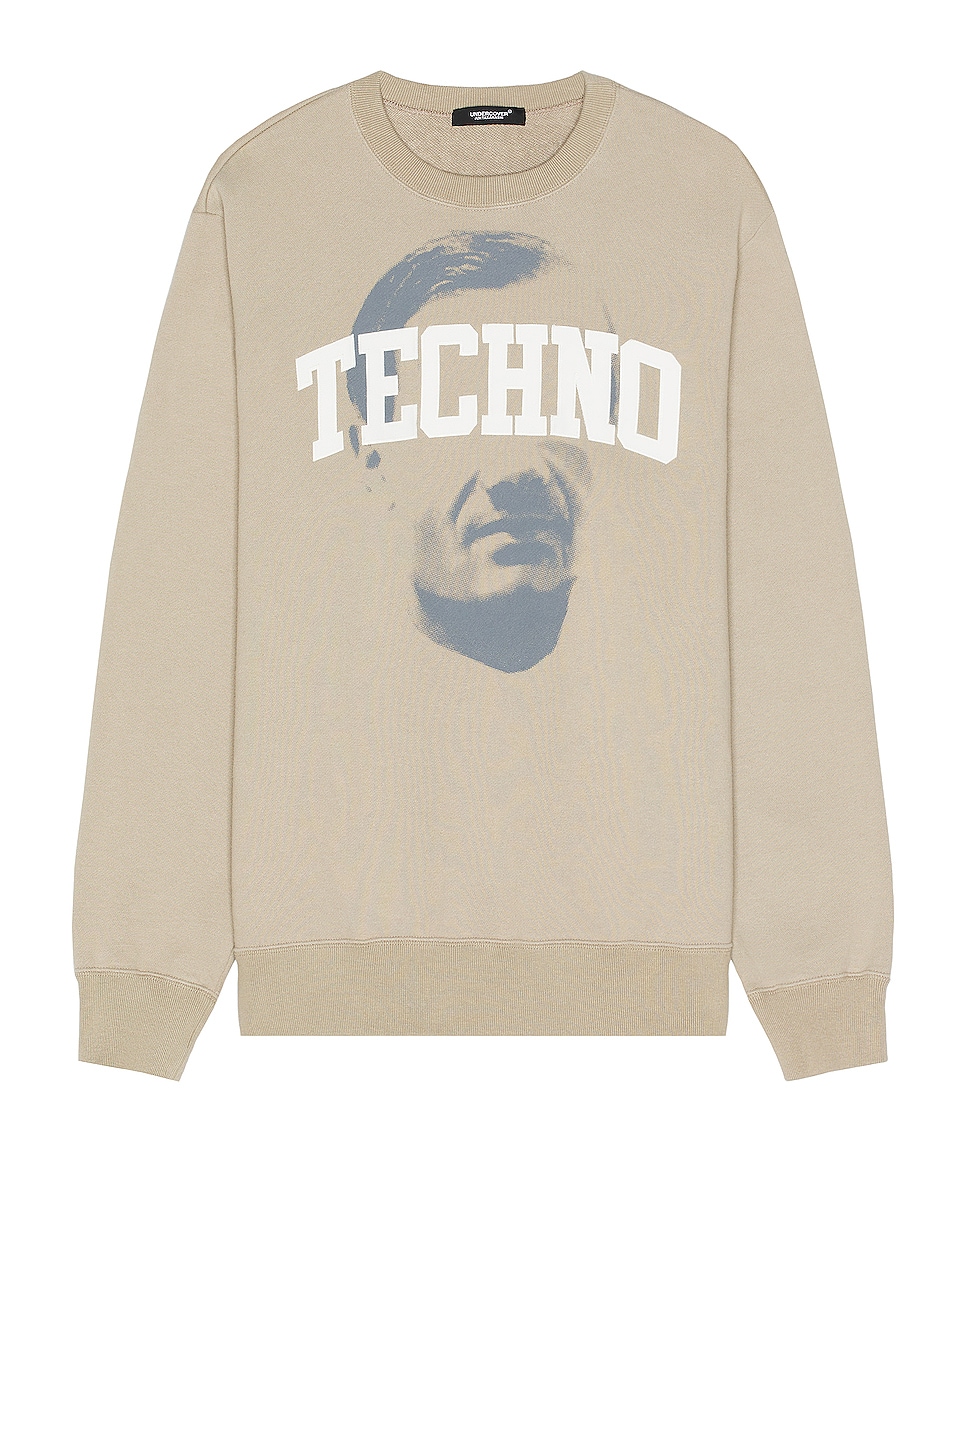 Image 1 of Undercover Techno Sweater in Beige